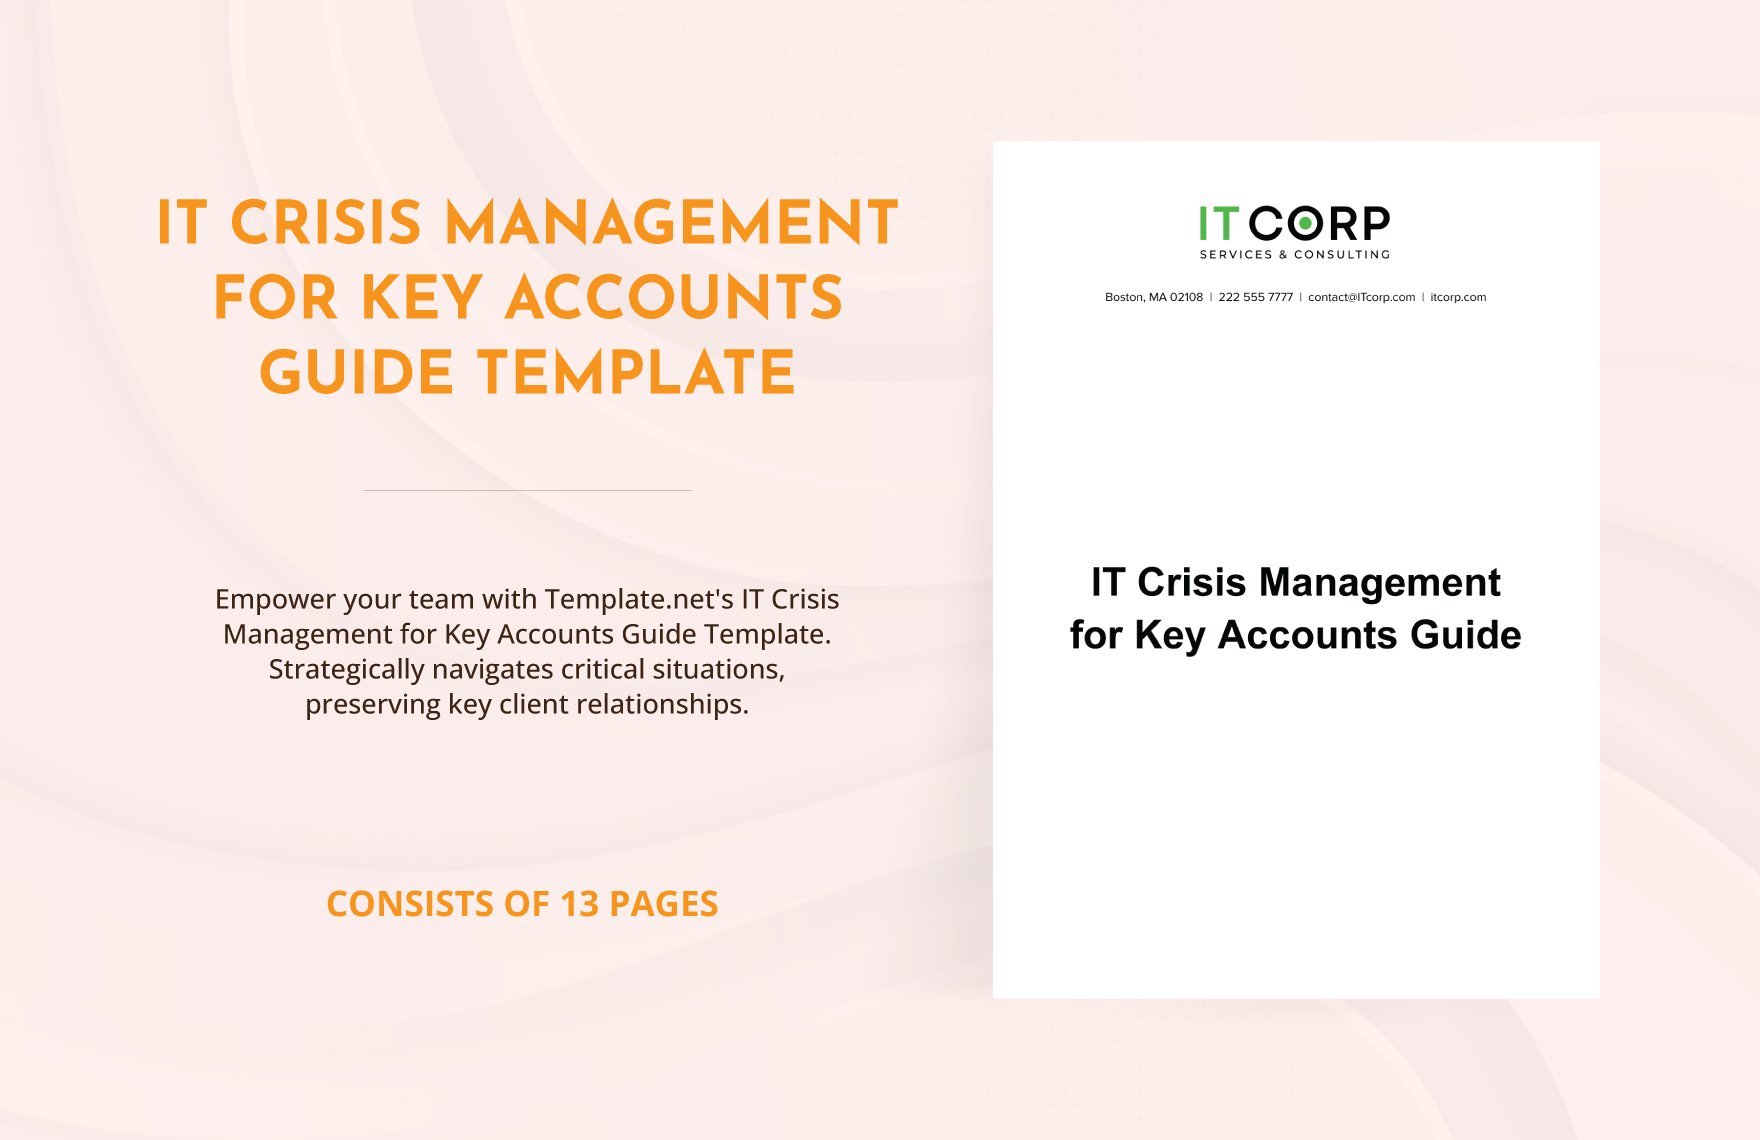 IT Crisis Management for Key Accounts Guide Template